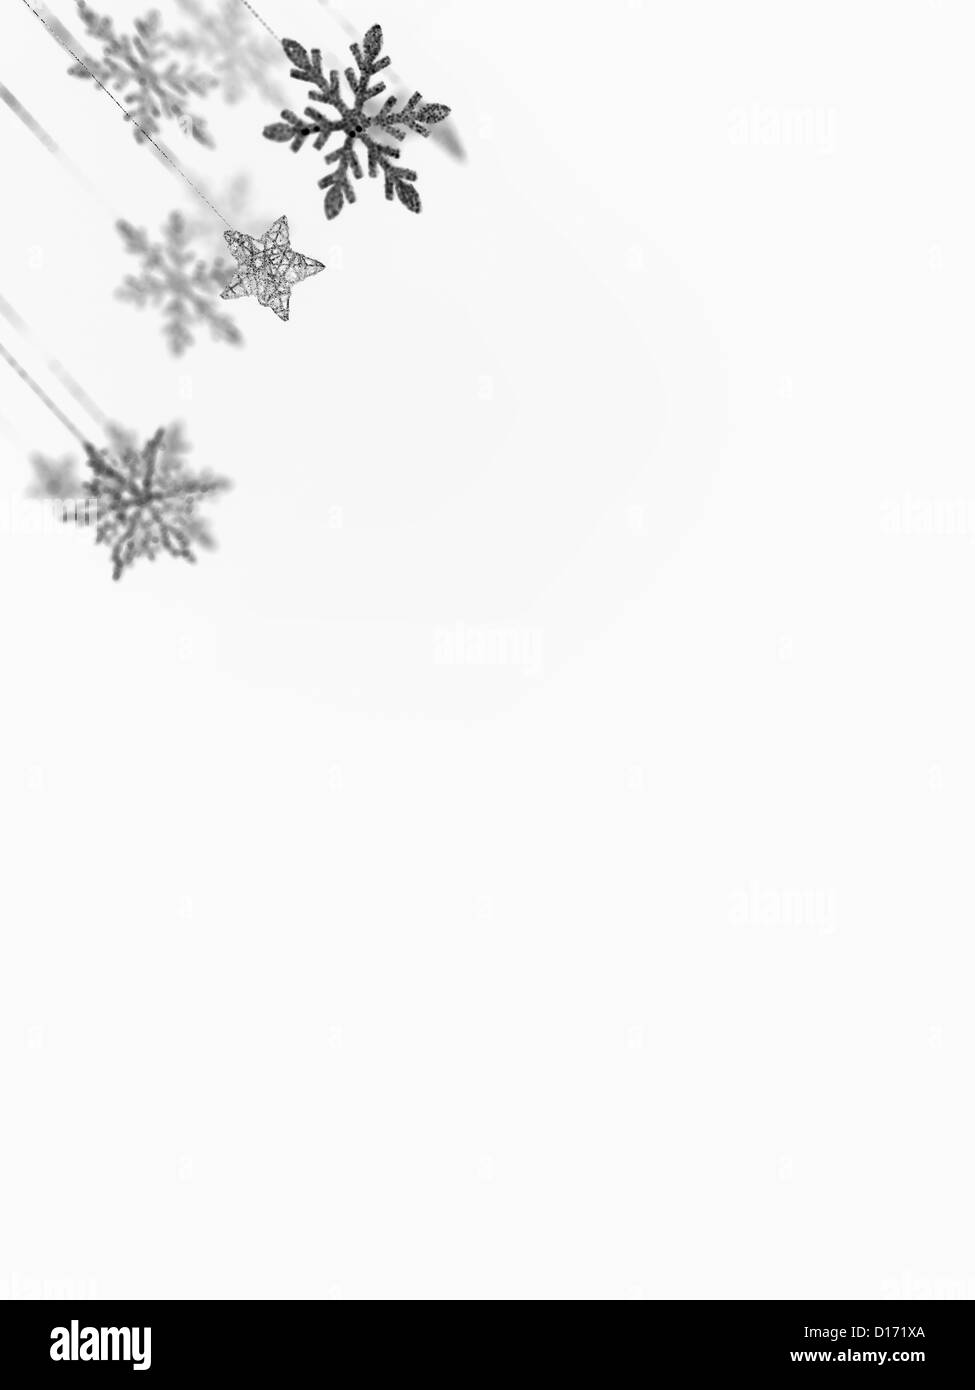 closeup of hanging christmas snowflakes and star decorations, on the upper left corner of the frame, isolated on white Stock Photo